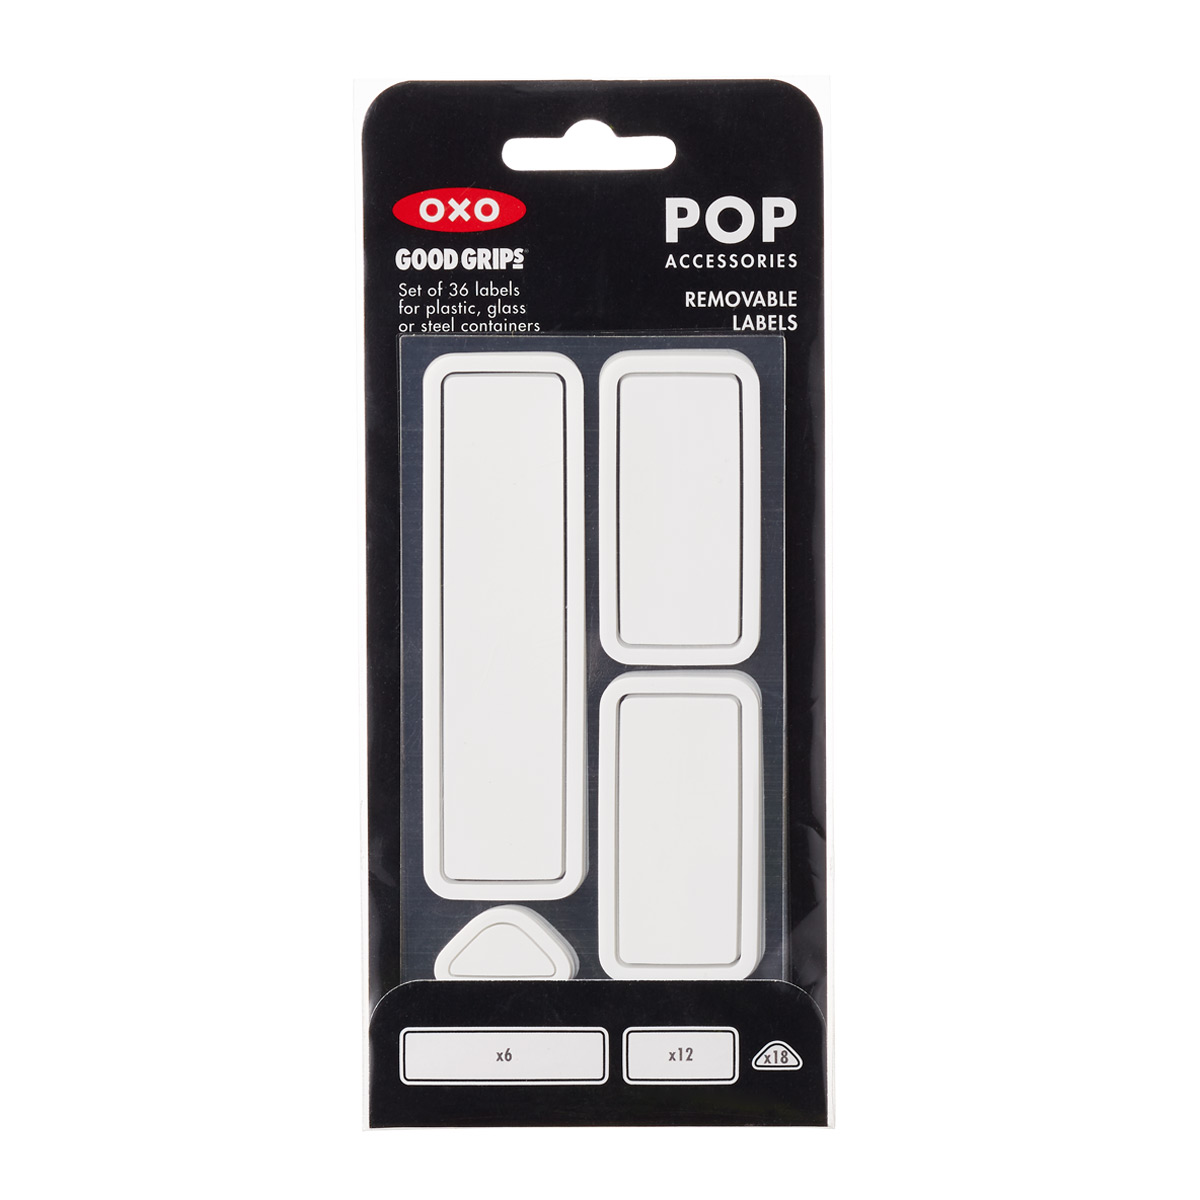 https://www.containerstore.com/catalogimages/368373/10075025-OXO-POP-removable-labels-v2.jpg